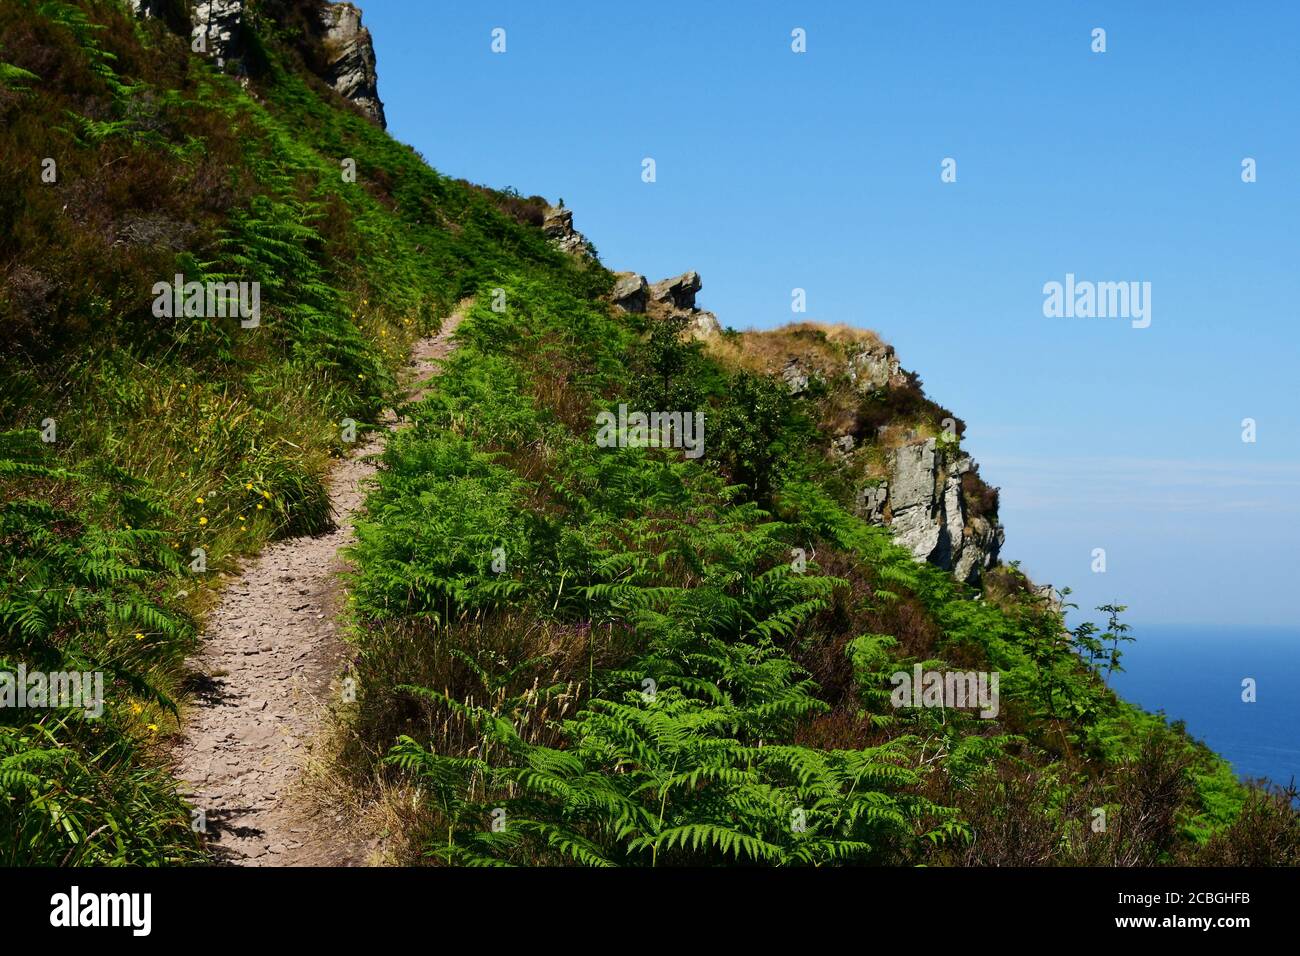 The coast path climbs steeply towards a rocky outcrop between Woody Bay and Heddon's Mouth on the North Devon coast. Stock Photo